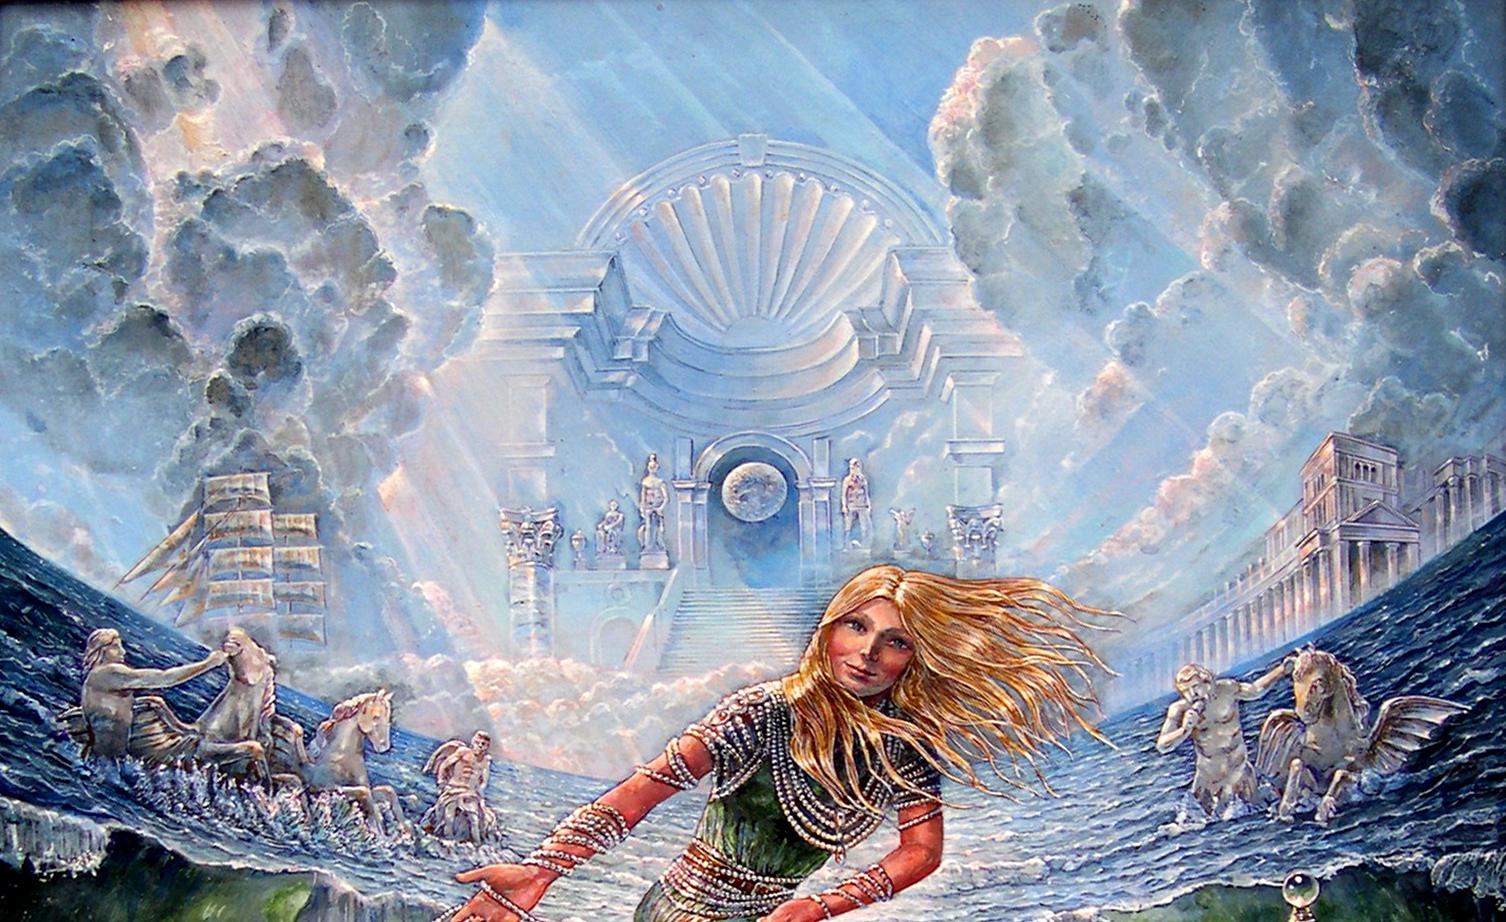 This John Stephens original acrylic on panel painting measures 24x30 in and is available for $27,500. 